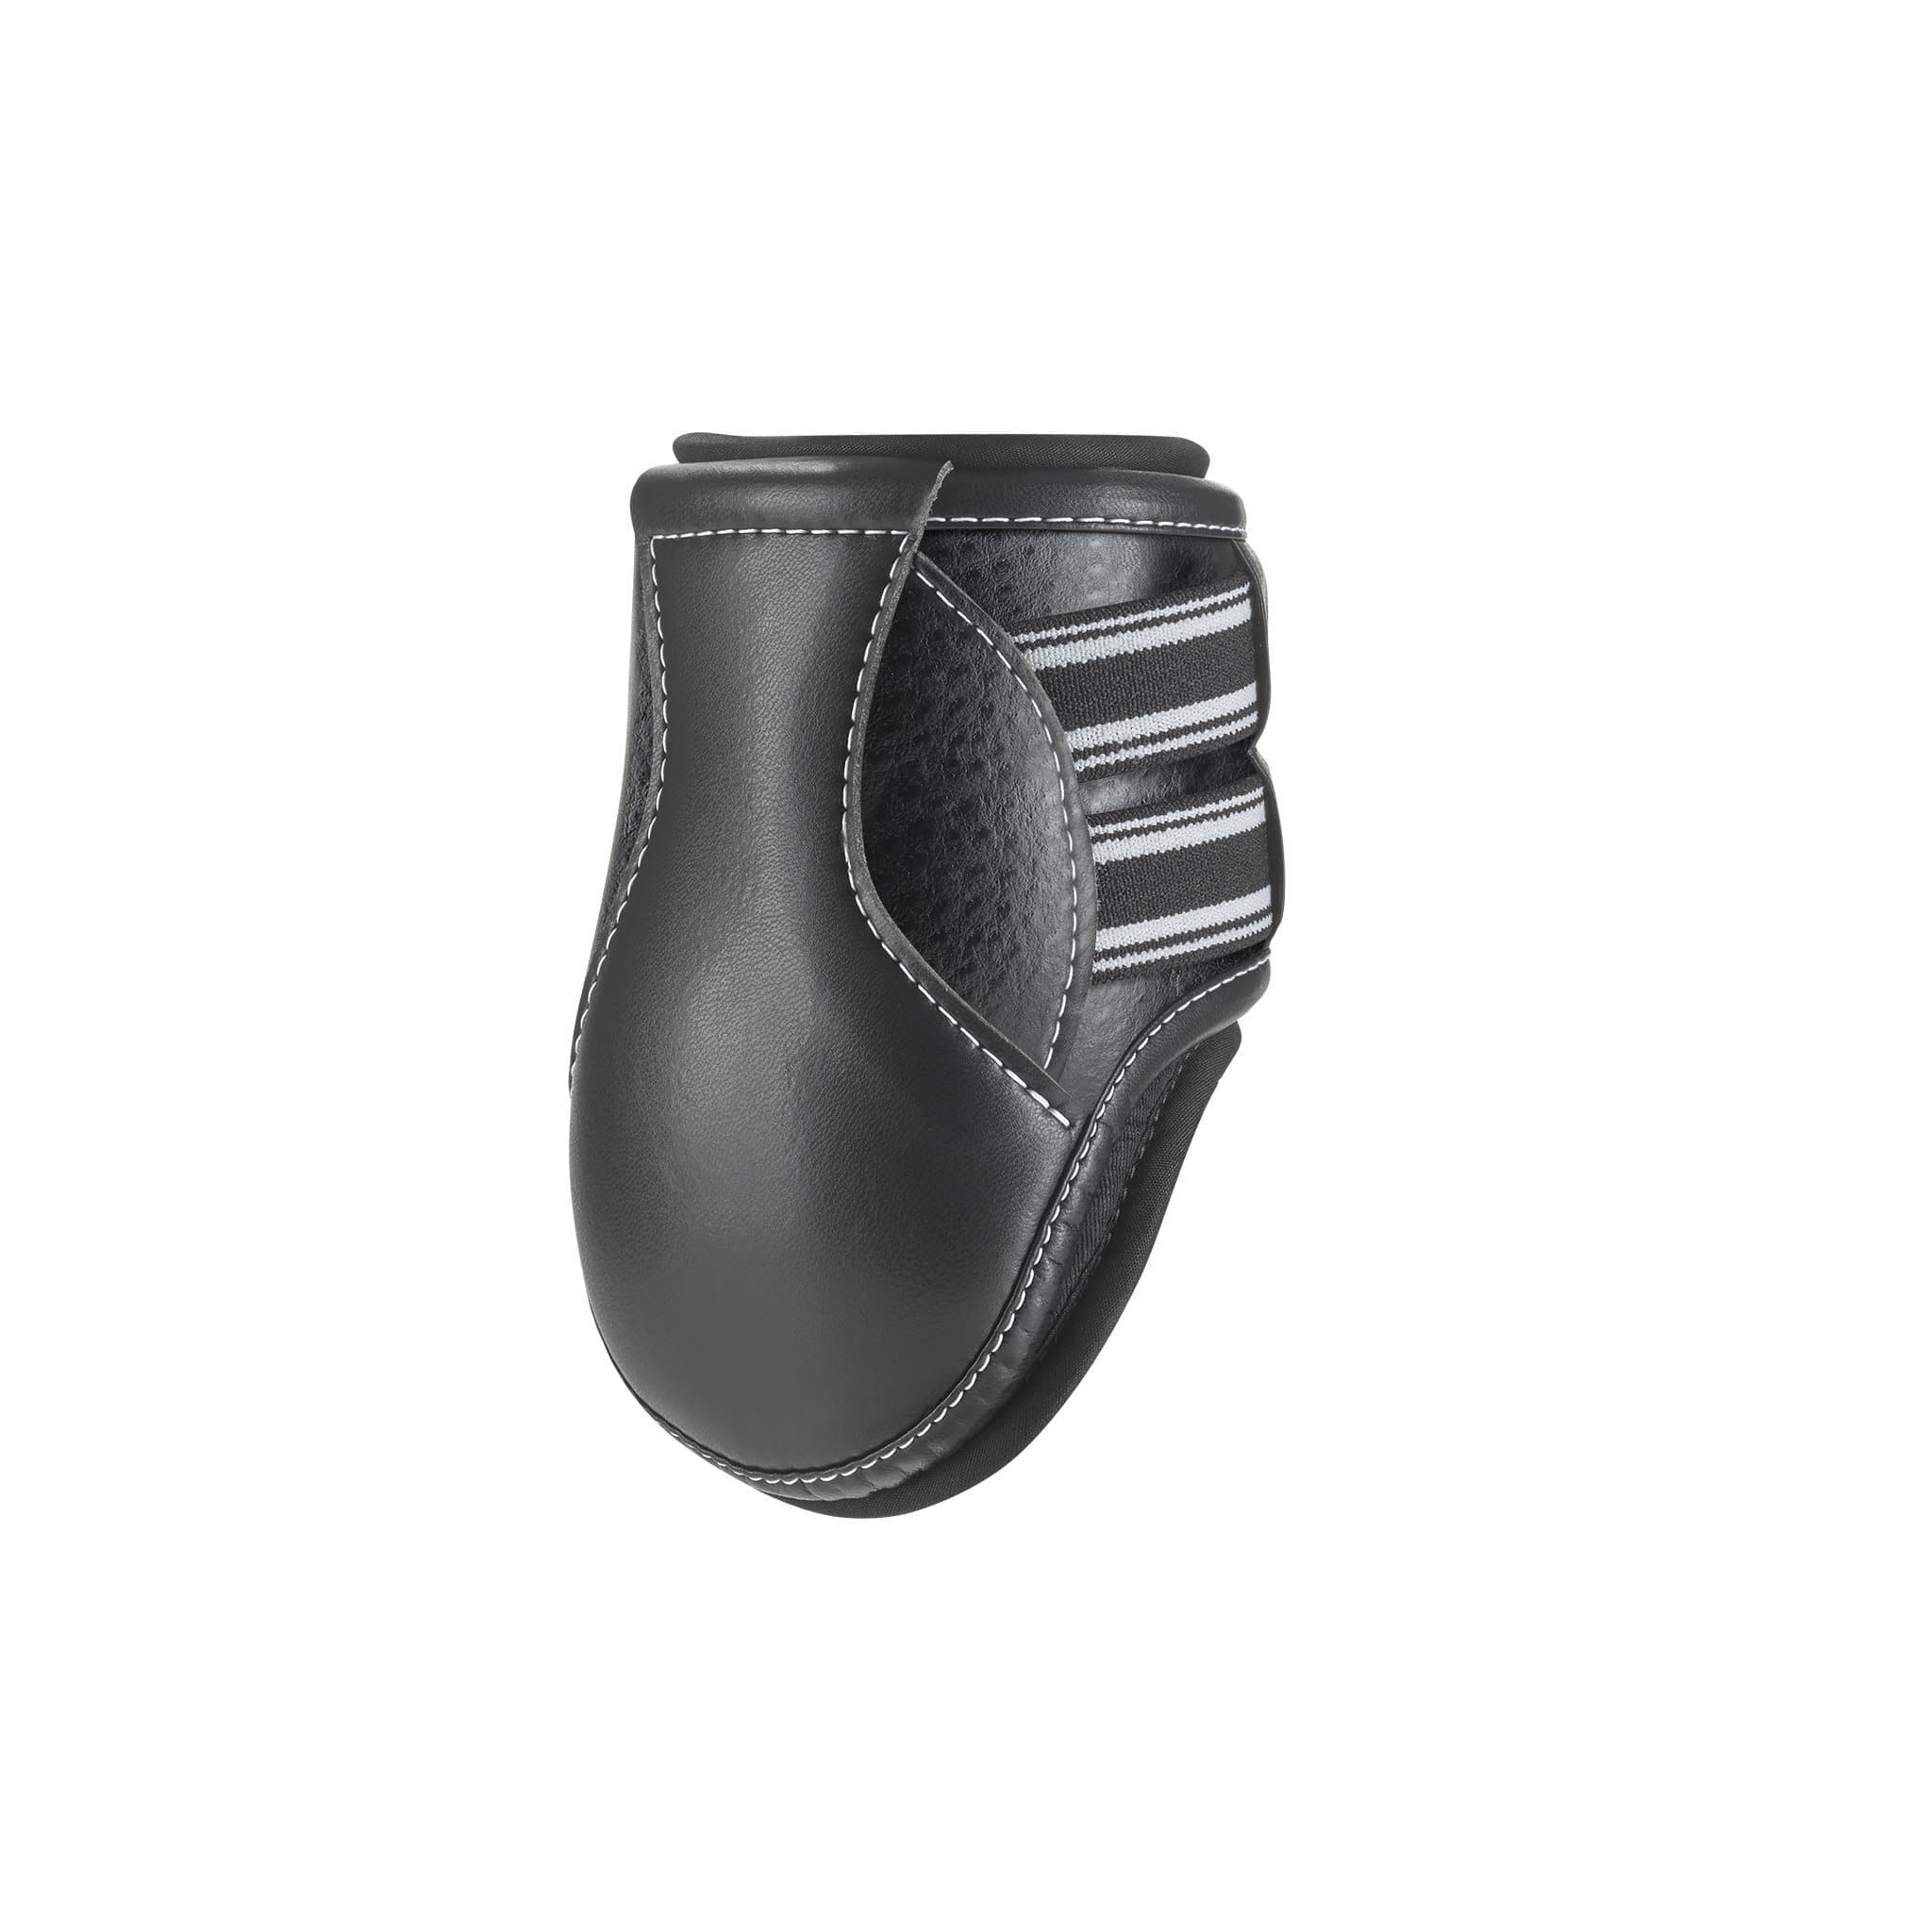 EquiFit D-Teq Hind Boot with ImpacTeq Liner